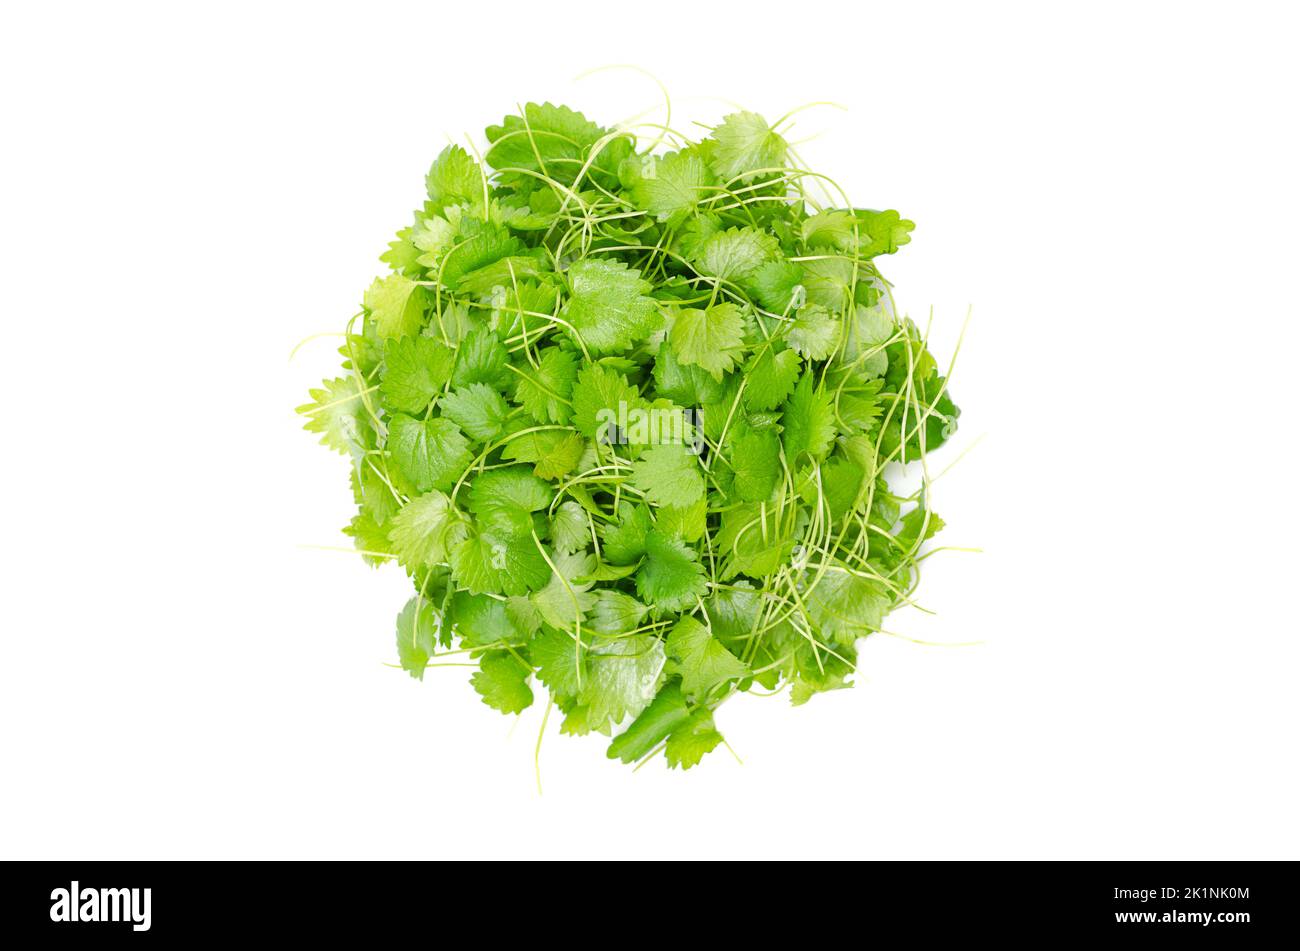 Anise microgreens, circle from above. Shoots of Pimpinella anisum, also called aniseed, a herb with a flavor reminiscent of licorice. Stock Photo